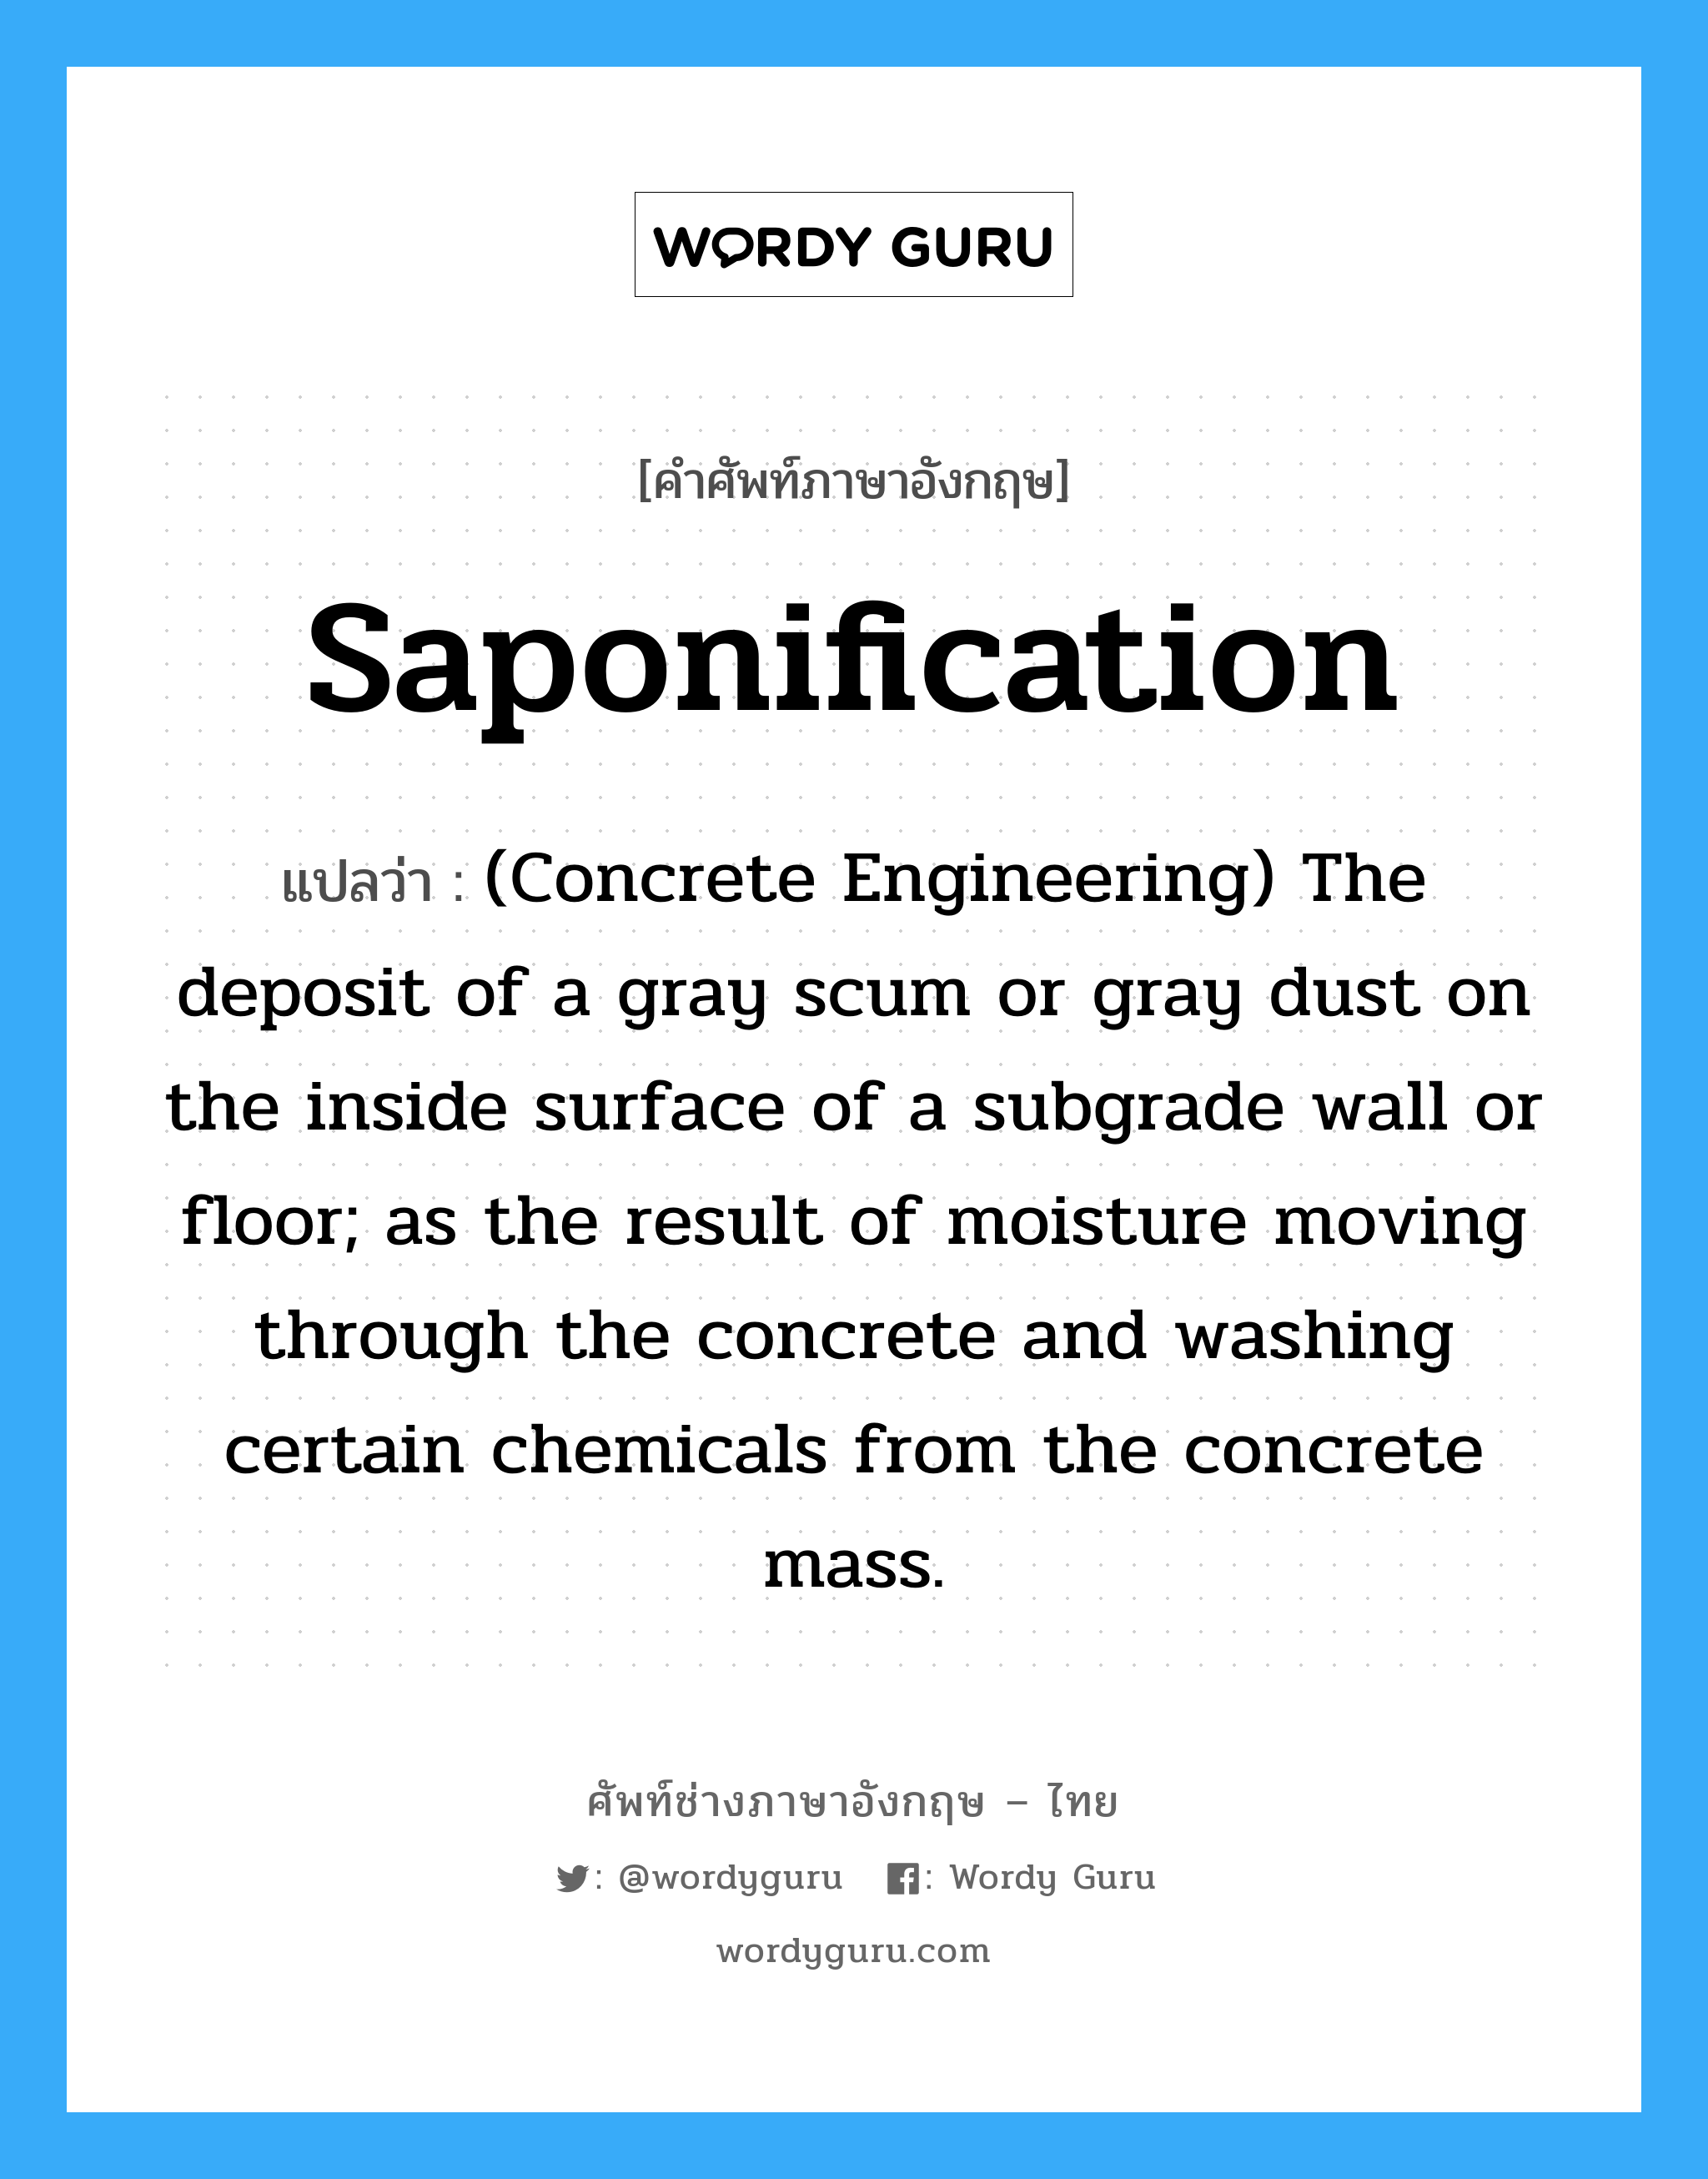 Saponification แปลว่า?, คำศัพท์ช่างภาษาอังกฤษ - ไทย Saponification คำศัพท์ภาษาอังกฤษ Saponification แปลว่า (Concrete Engineering) The deposit of a gray scum or gray dust on the inside surface of a subgrade wall or floor; as the result of moisture moving through the concrete and washing certain chemicals from the concrete mass.